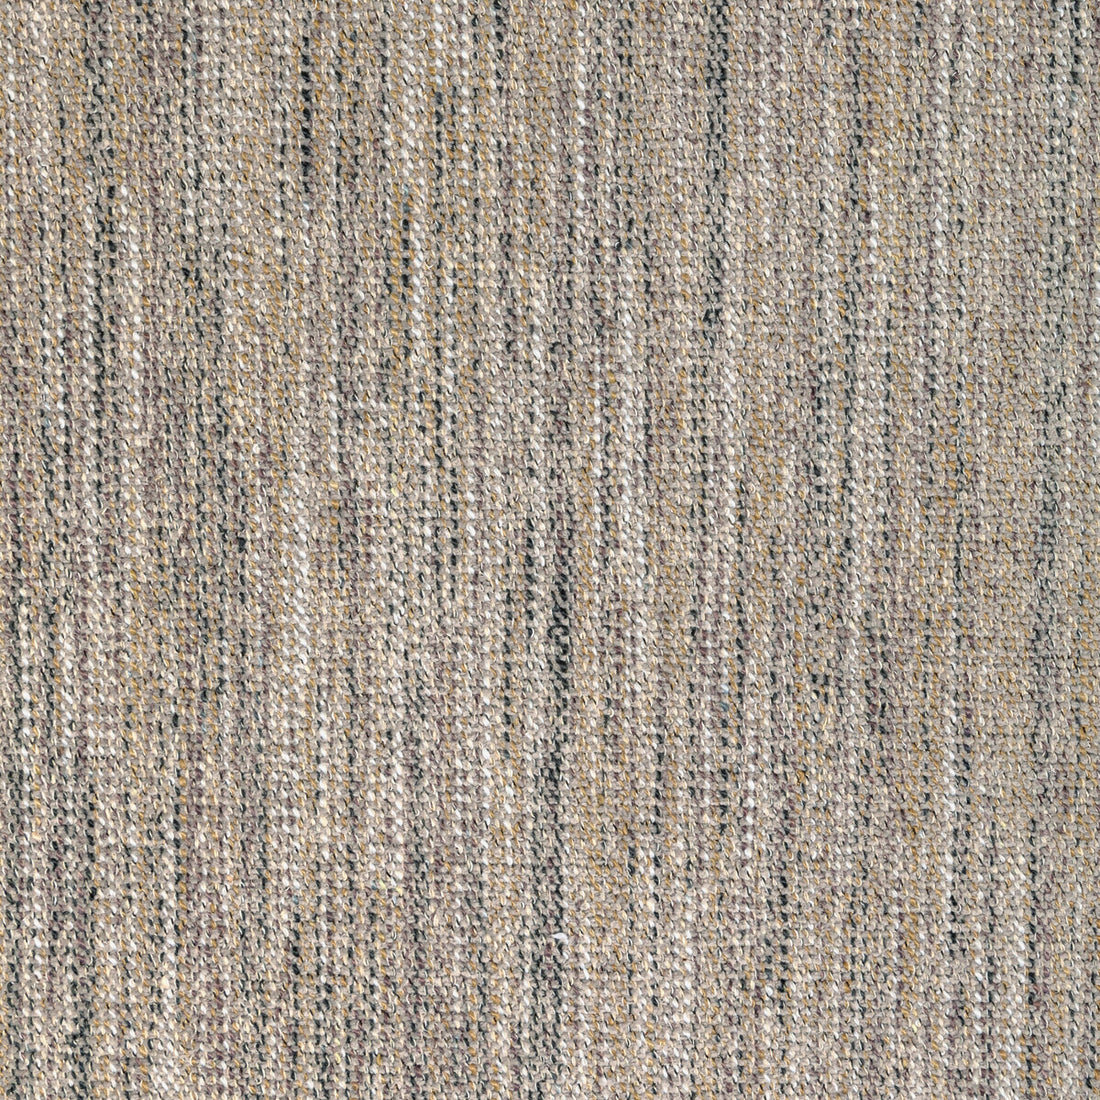 Delfino fabric in stone color - pattern 36748.2111.0 - by Kravet Contract in the Refined Textures Performance Crypton collection